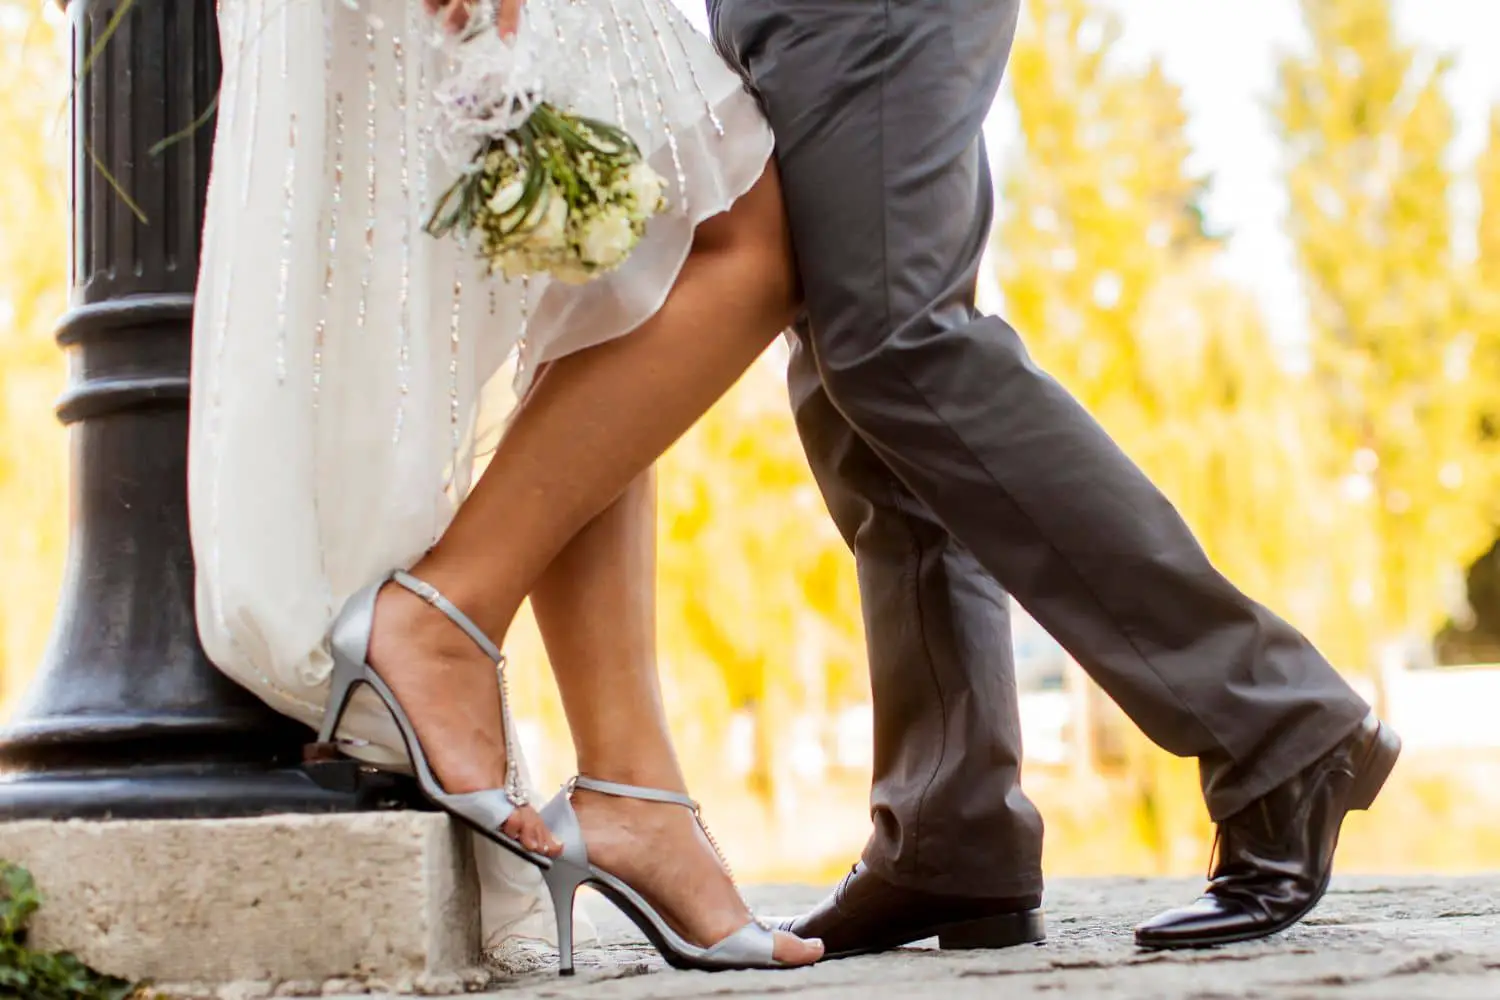 180 Wedding Captions To Use For Your Social Media Posts